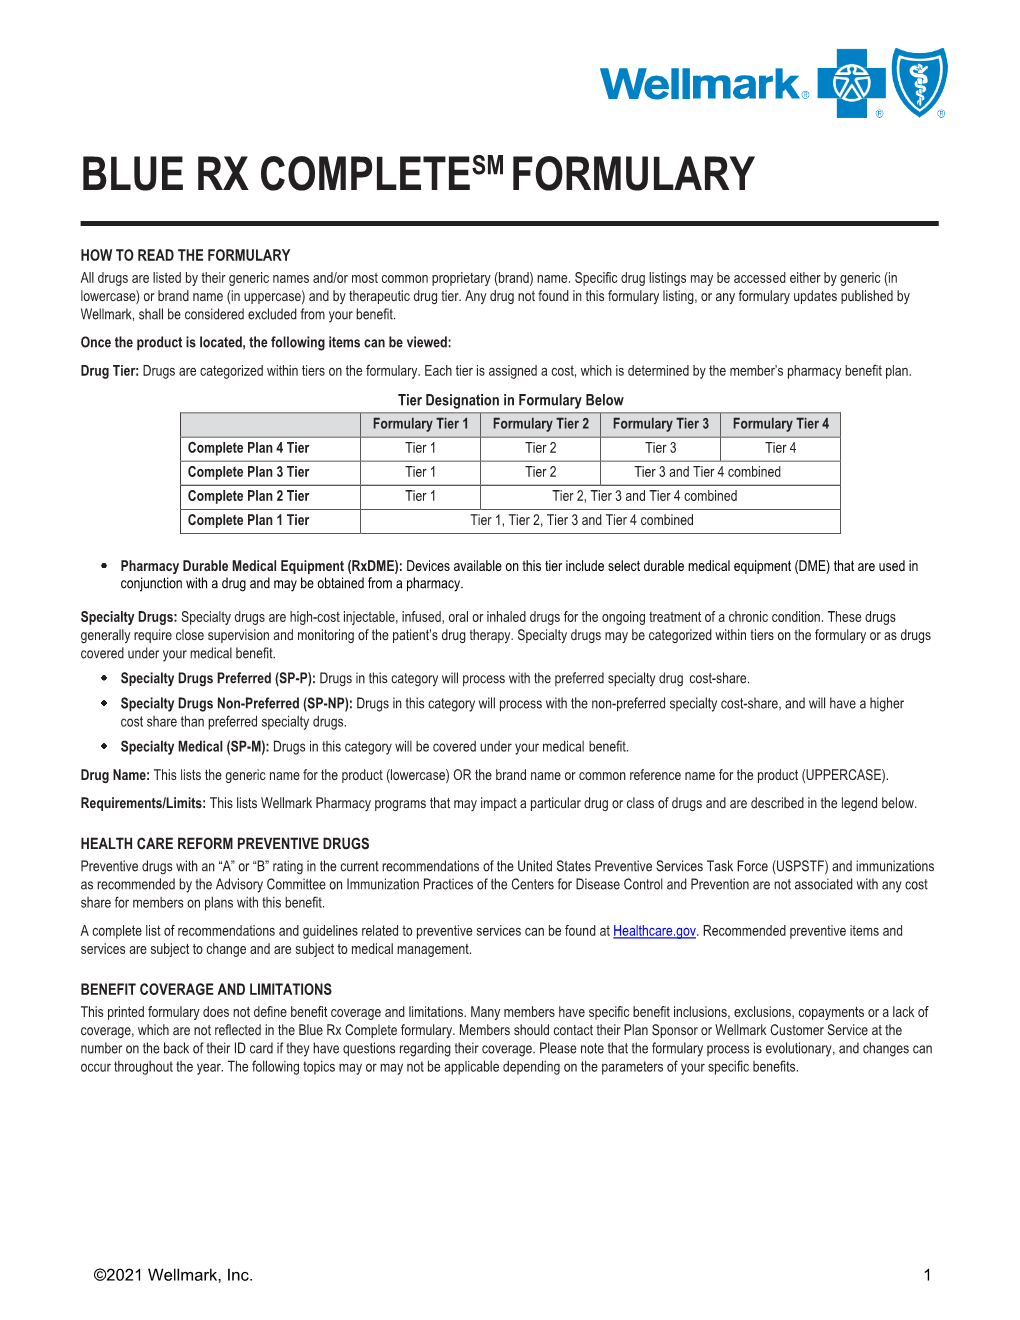 Blue Rx Completesm Formulary